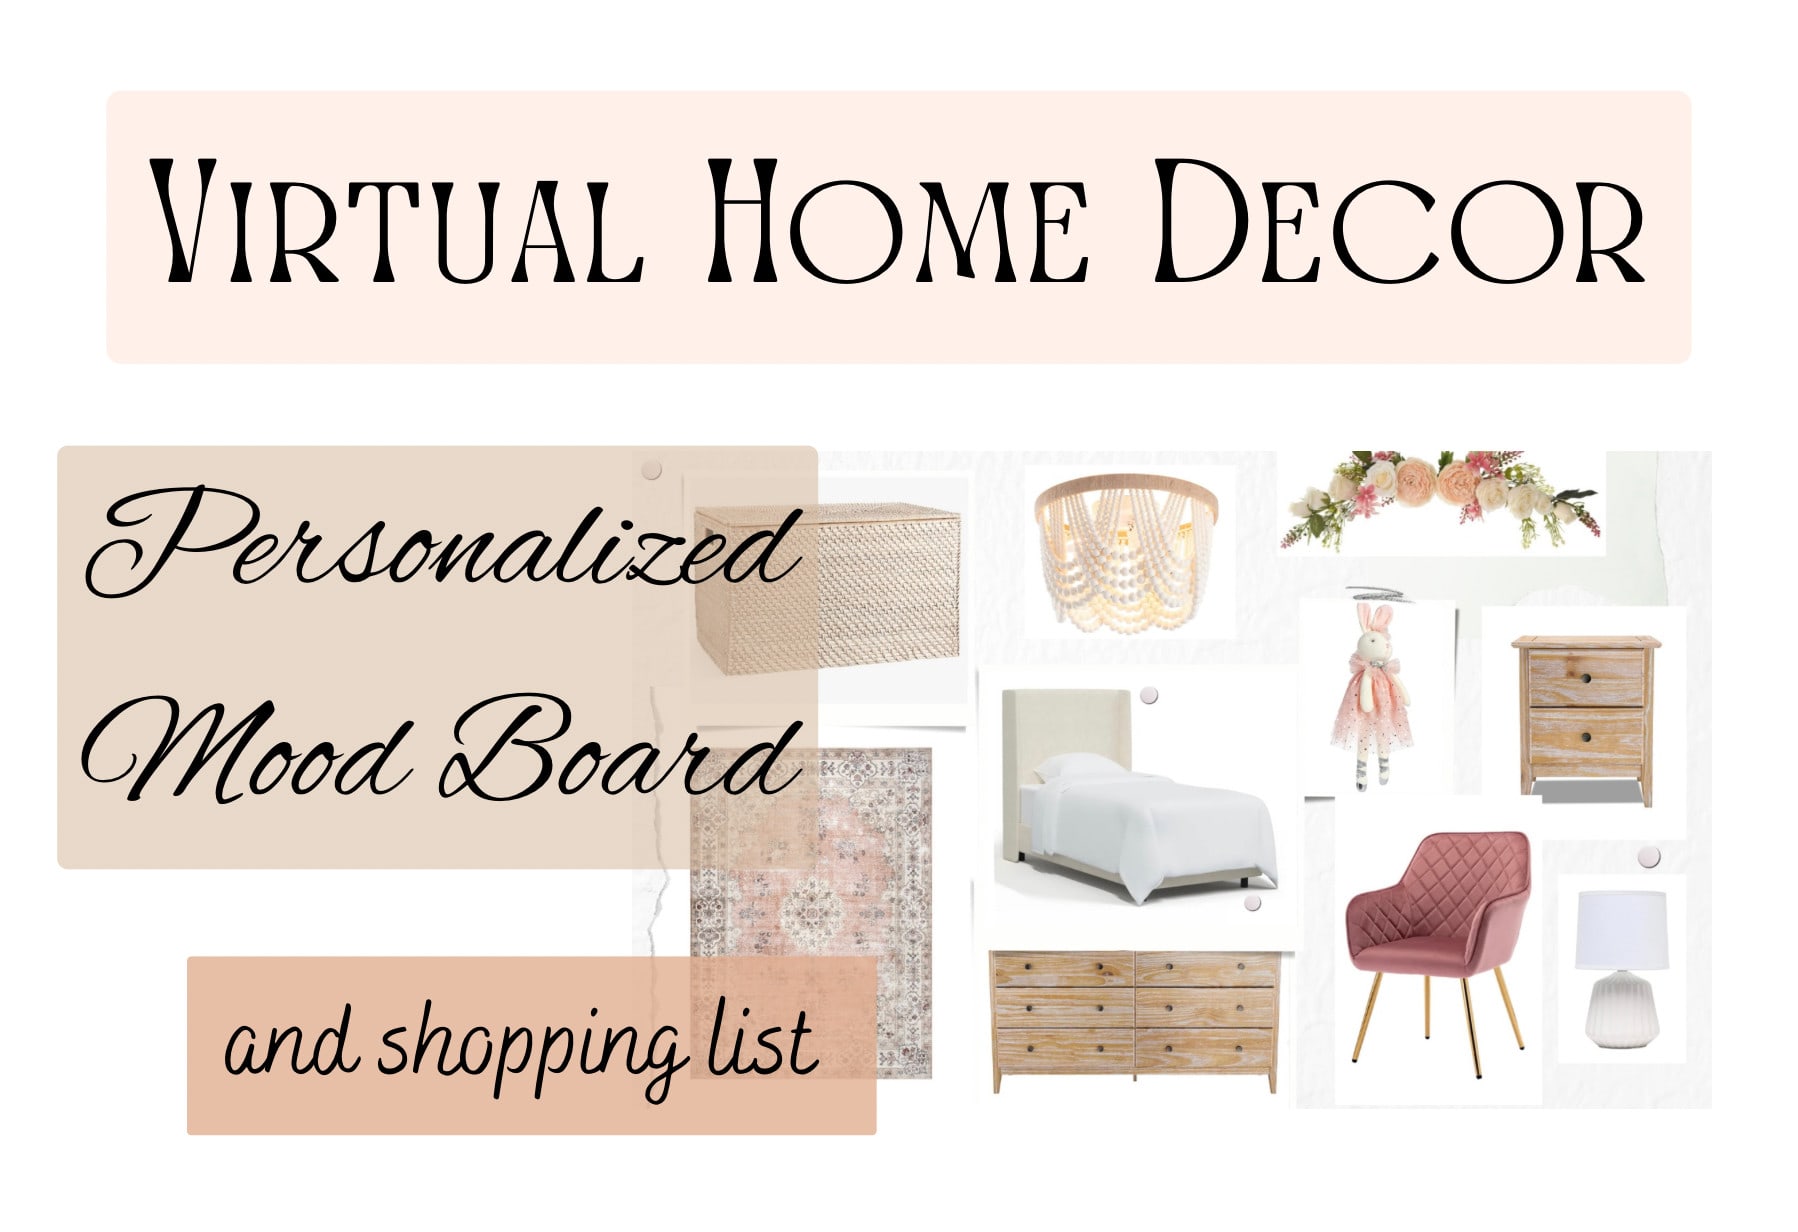 Be your virtual home decorator by Ashimenfr | Fiverr